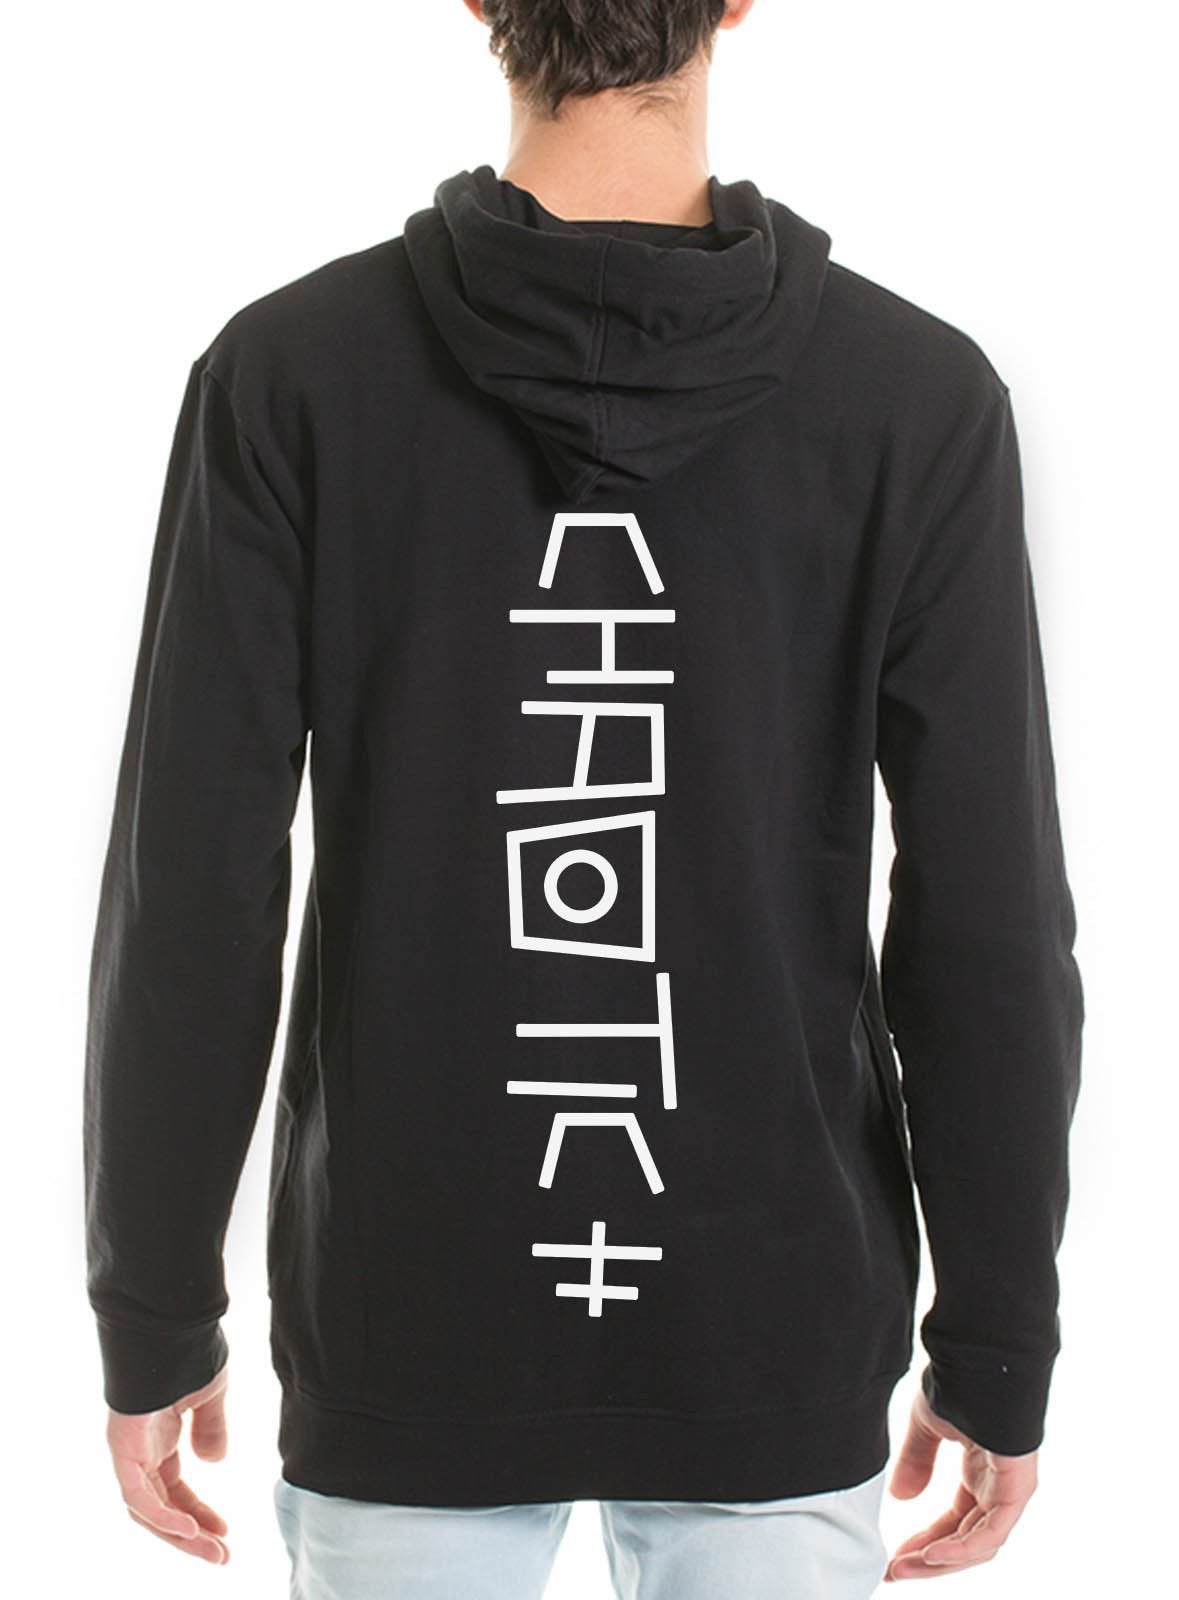 Gyptian Chaotic Clothing Streetwear Hoodie